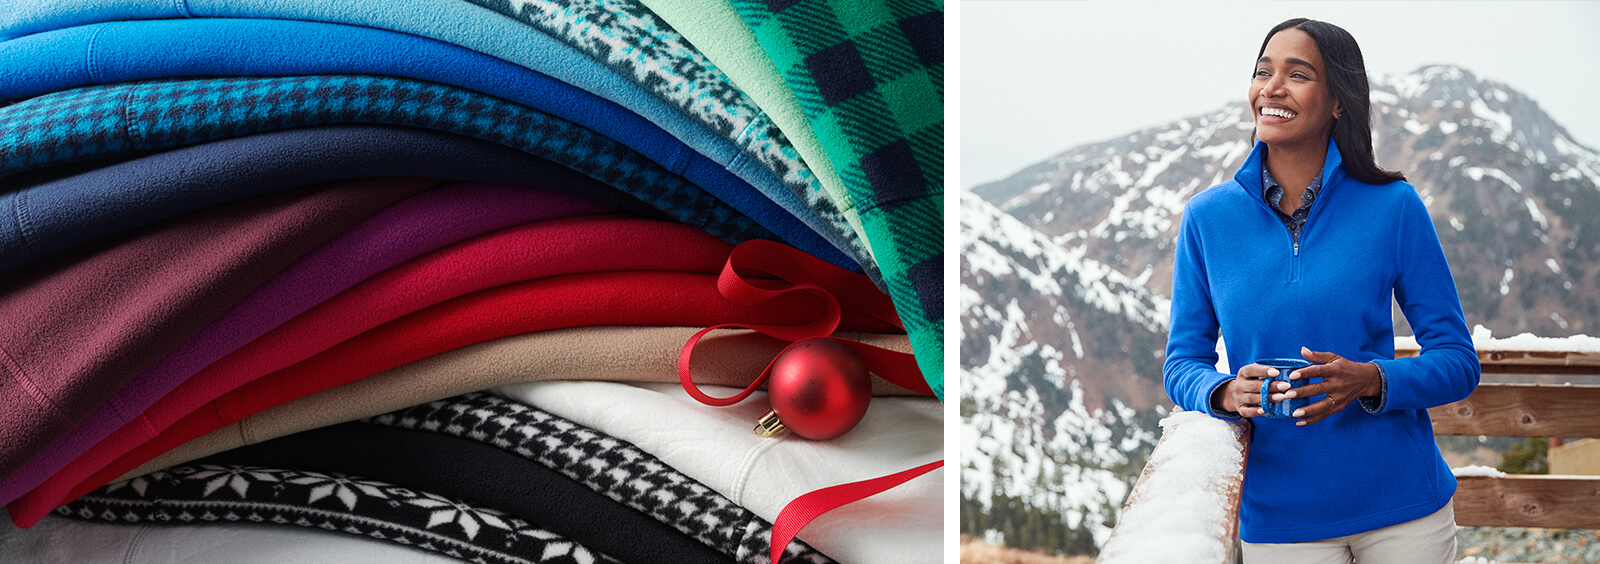 5 Essential Items to Pack for a Ski Vacation | Lands' End